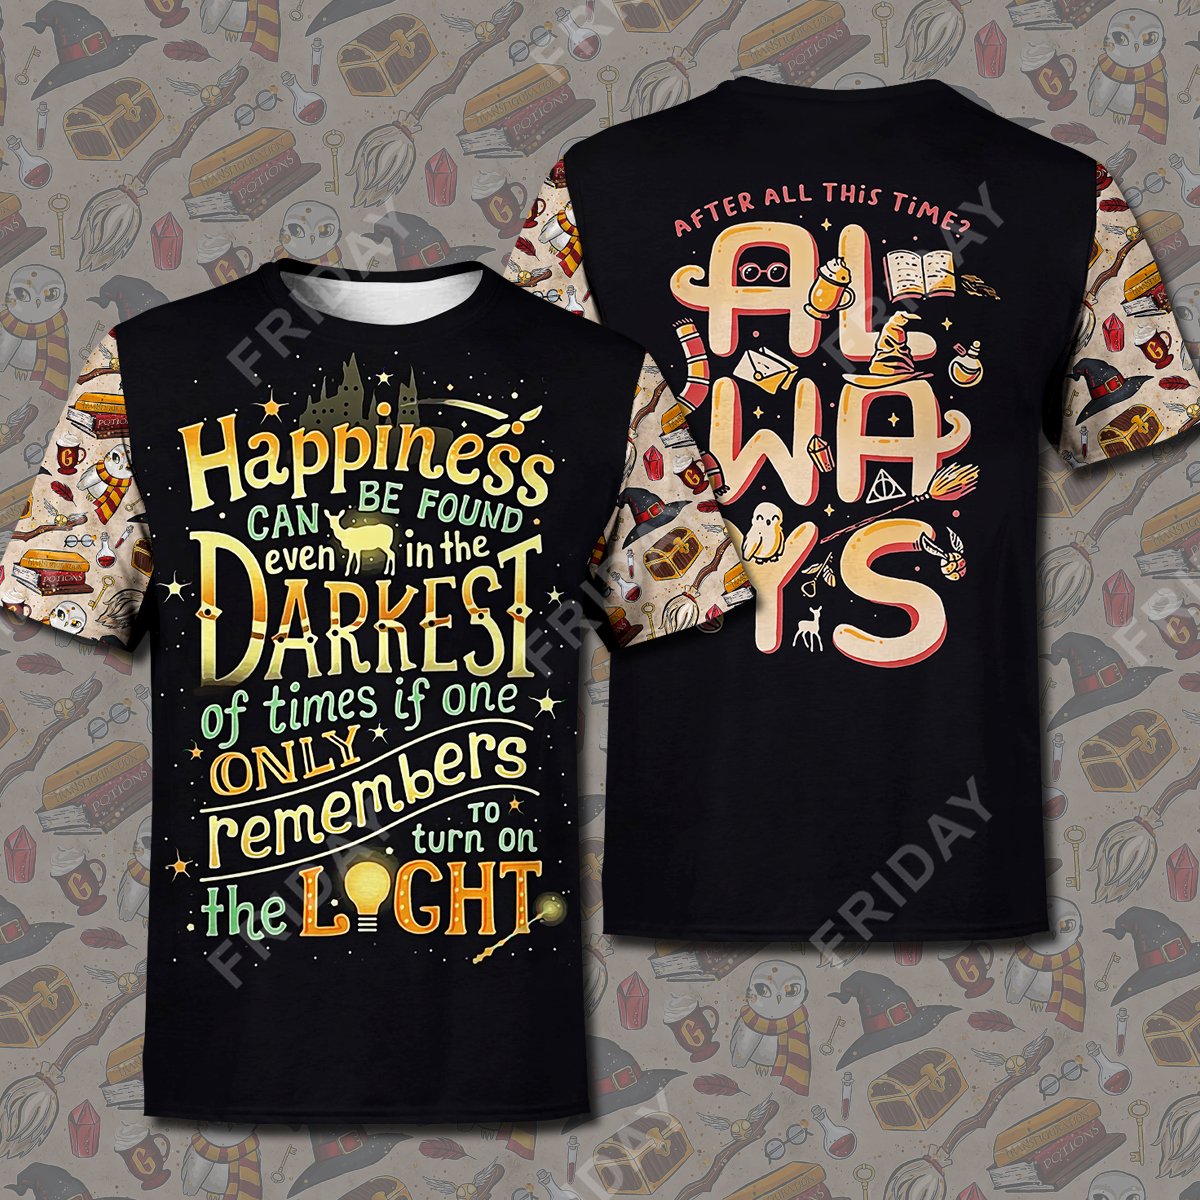 Unifinz HP T-shirt Happiness Can Be Found Even In The Darkest T-shirt Awesome High Quality HP Hoodie Sweater Tank 2025